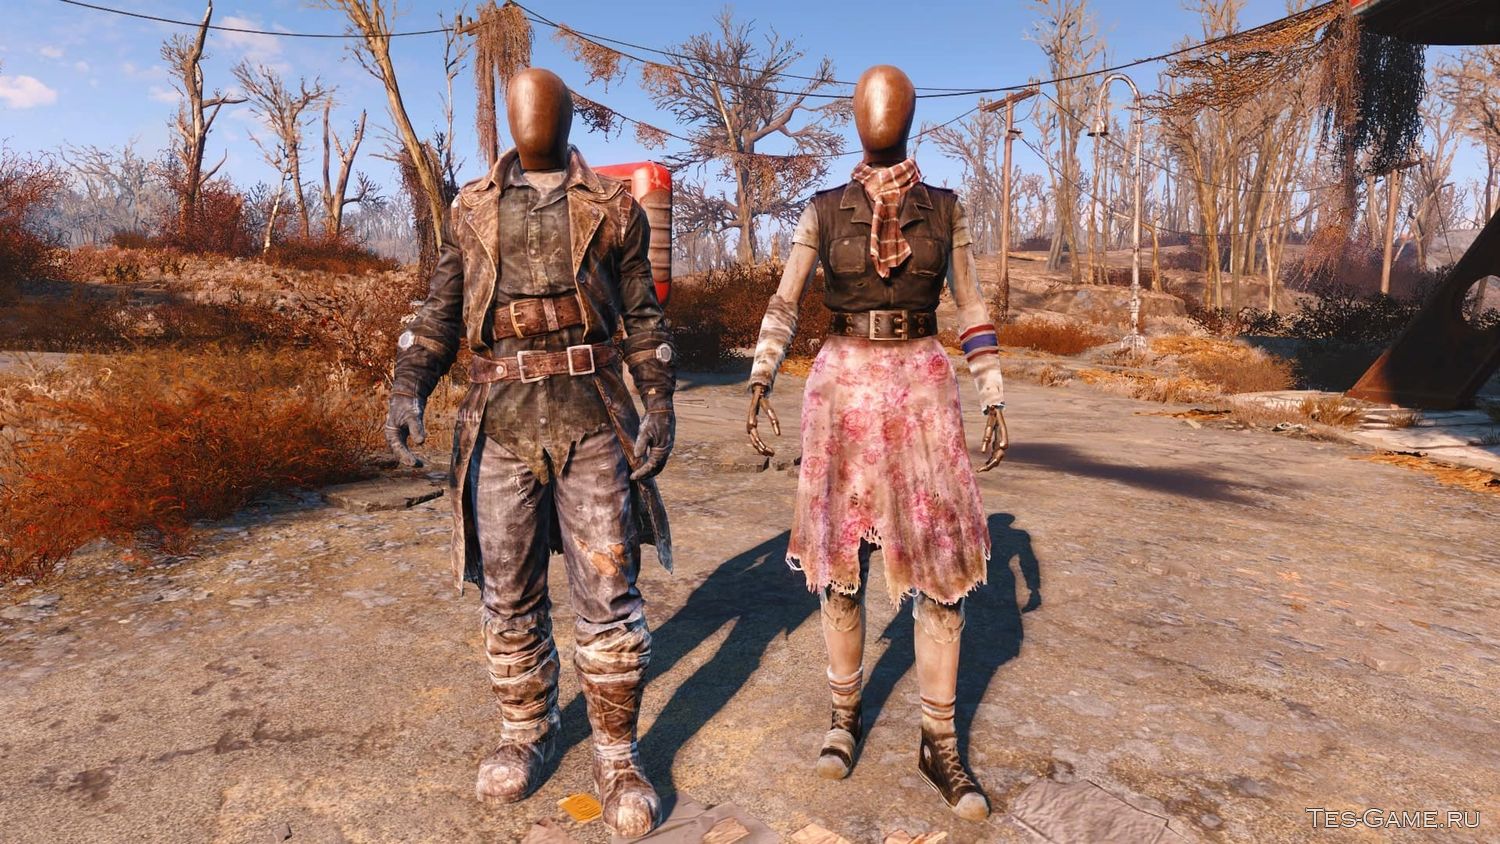 All clothing fallout 4 фото 1